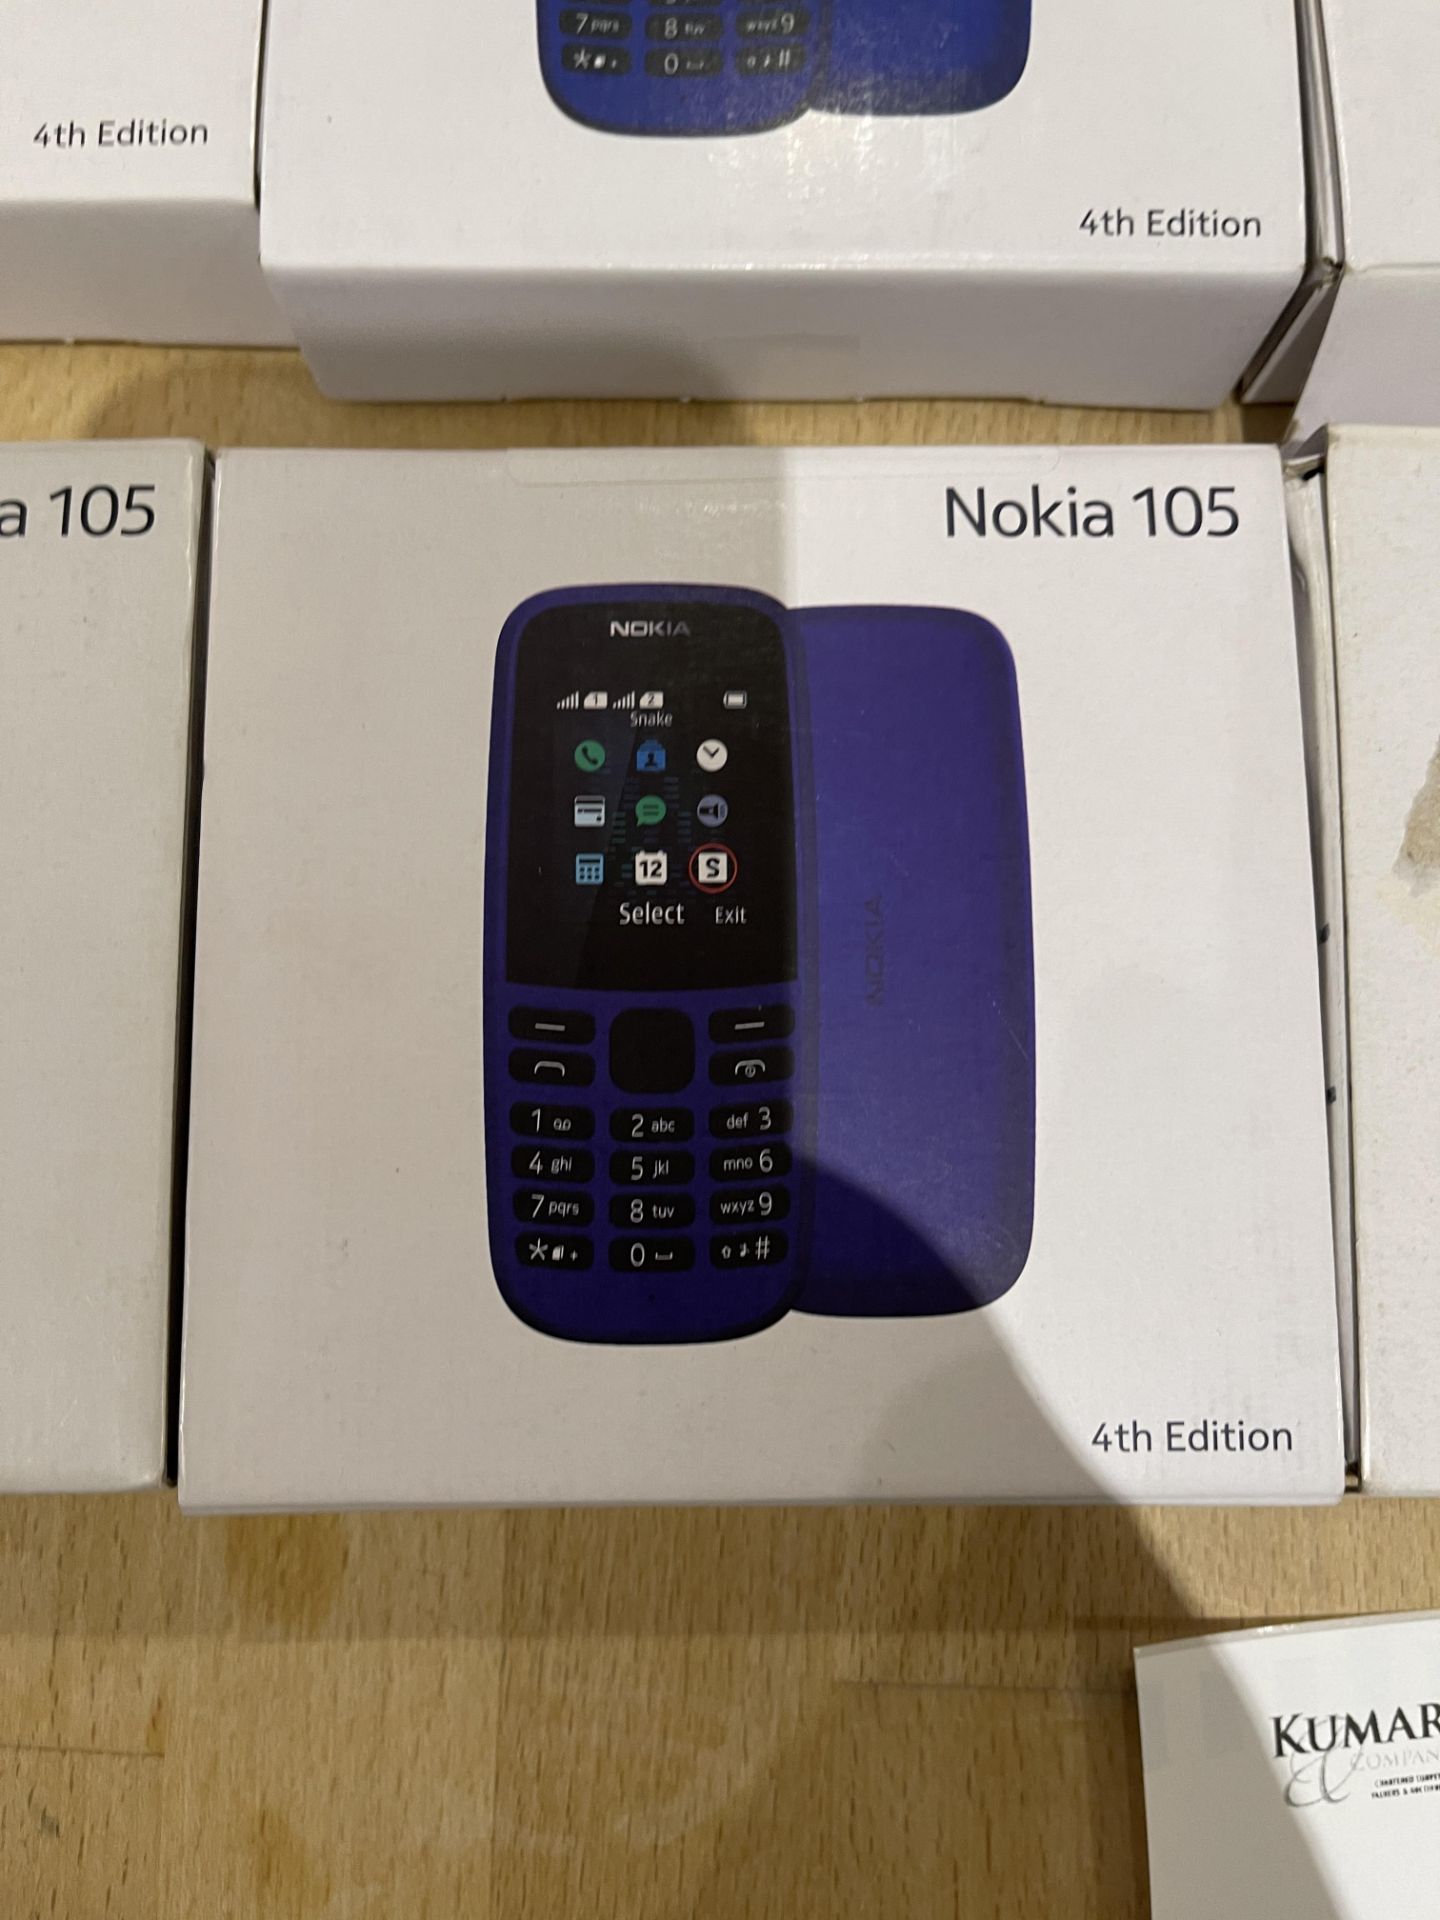 6: Nokia 105 Dual Sim Mobile Phones, Boxes Have Been Opened, Phone, Battery & Charger All Present - - Image 7 of 15